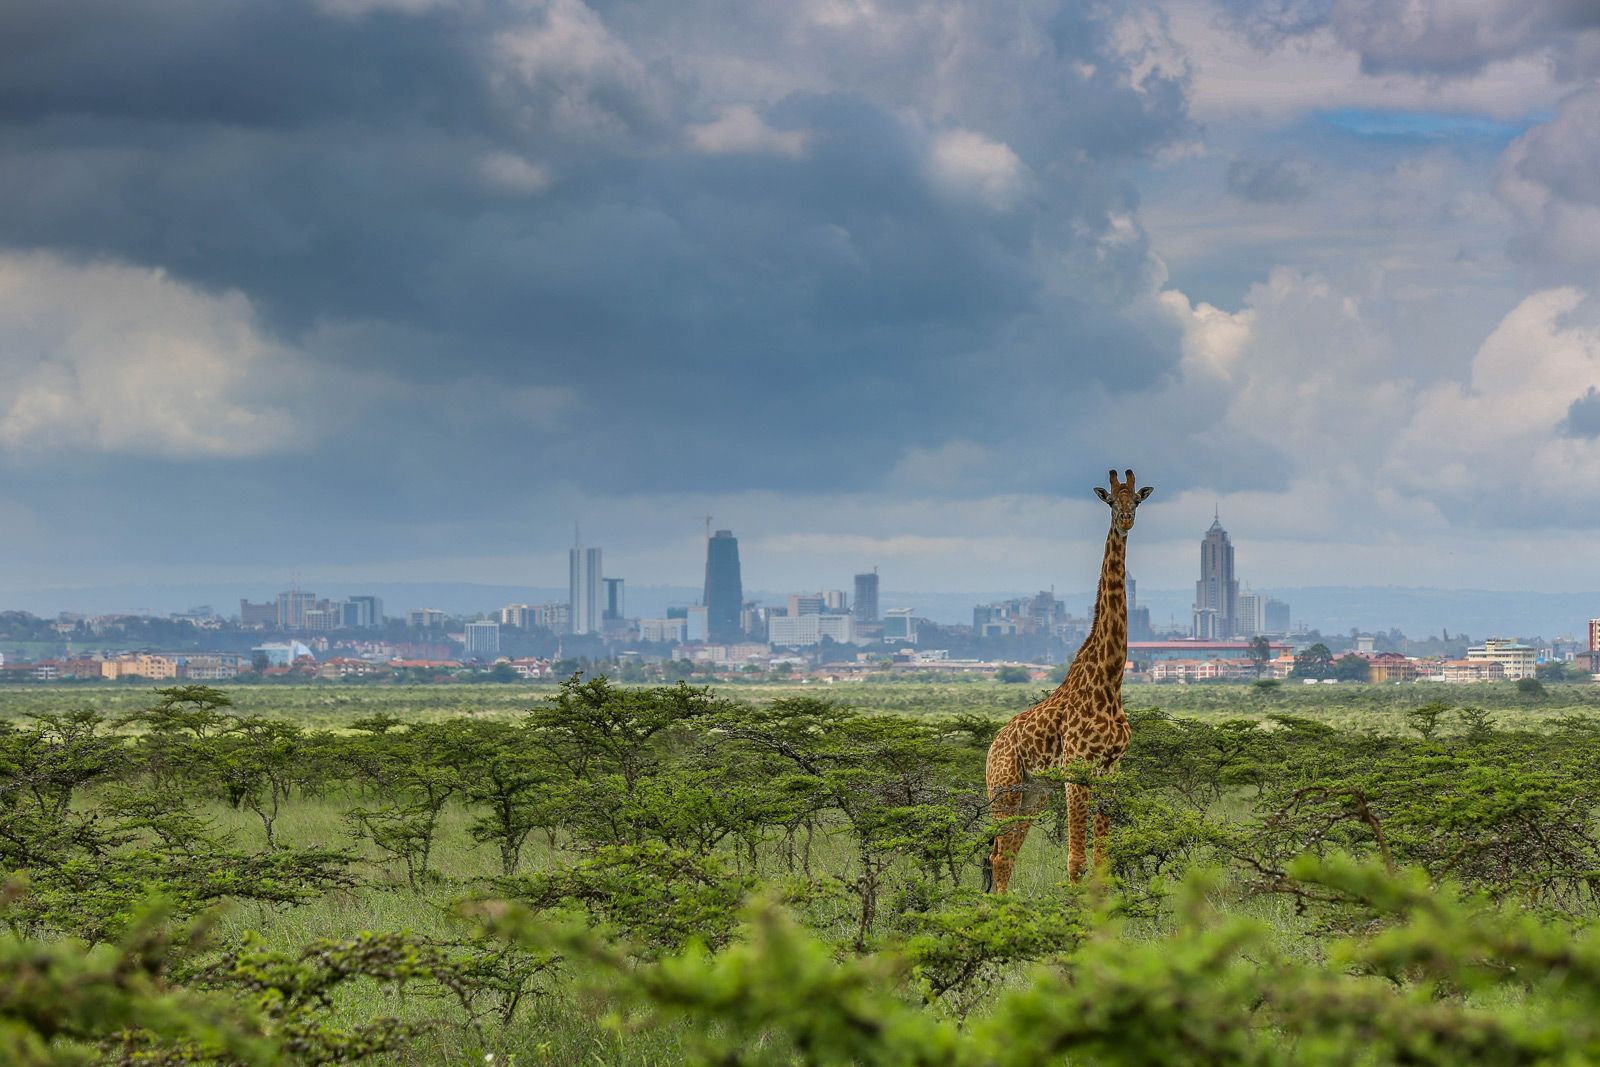 what is tourism like in kenya